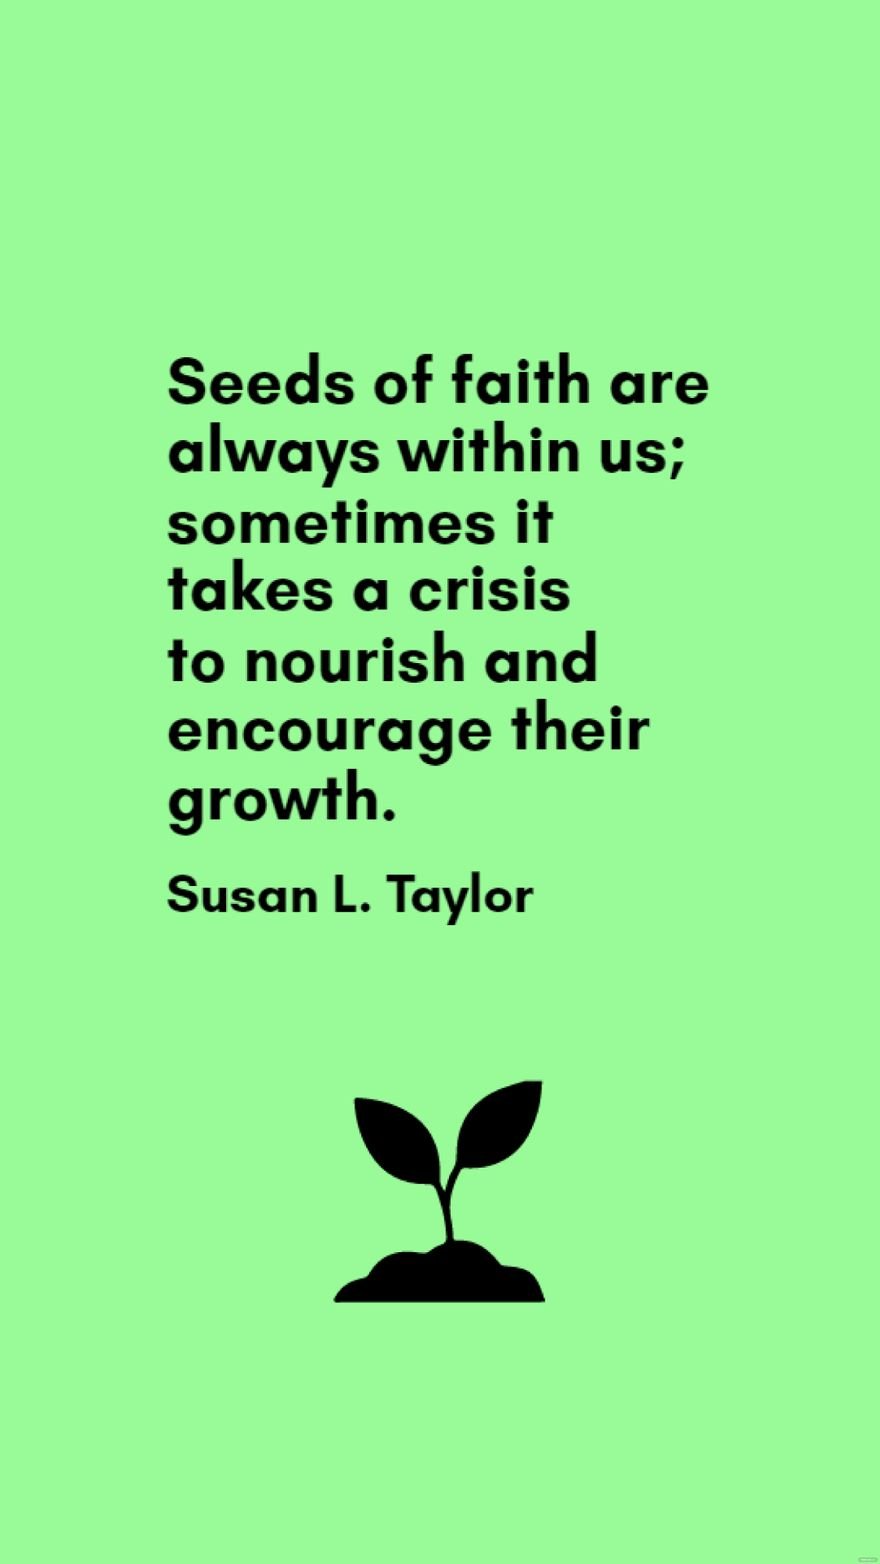 Susan L. Taylor - Seeds of faith are always within us; sometimes it takes a crisis to nourish and encourage their growth.